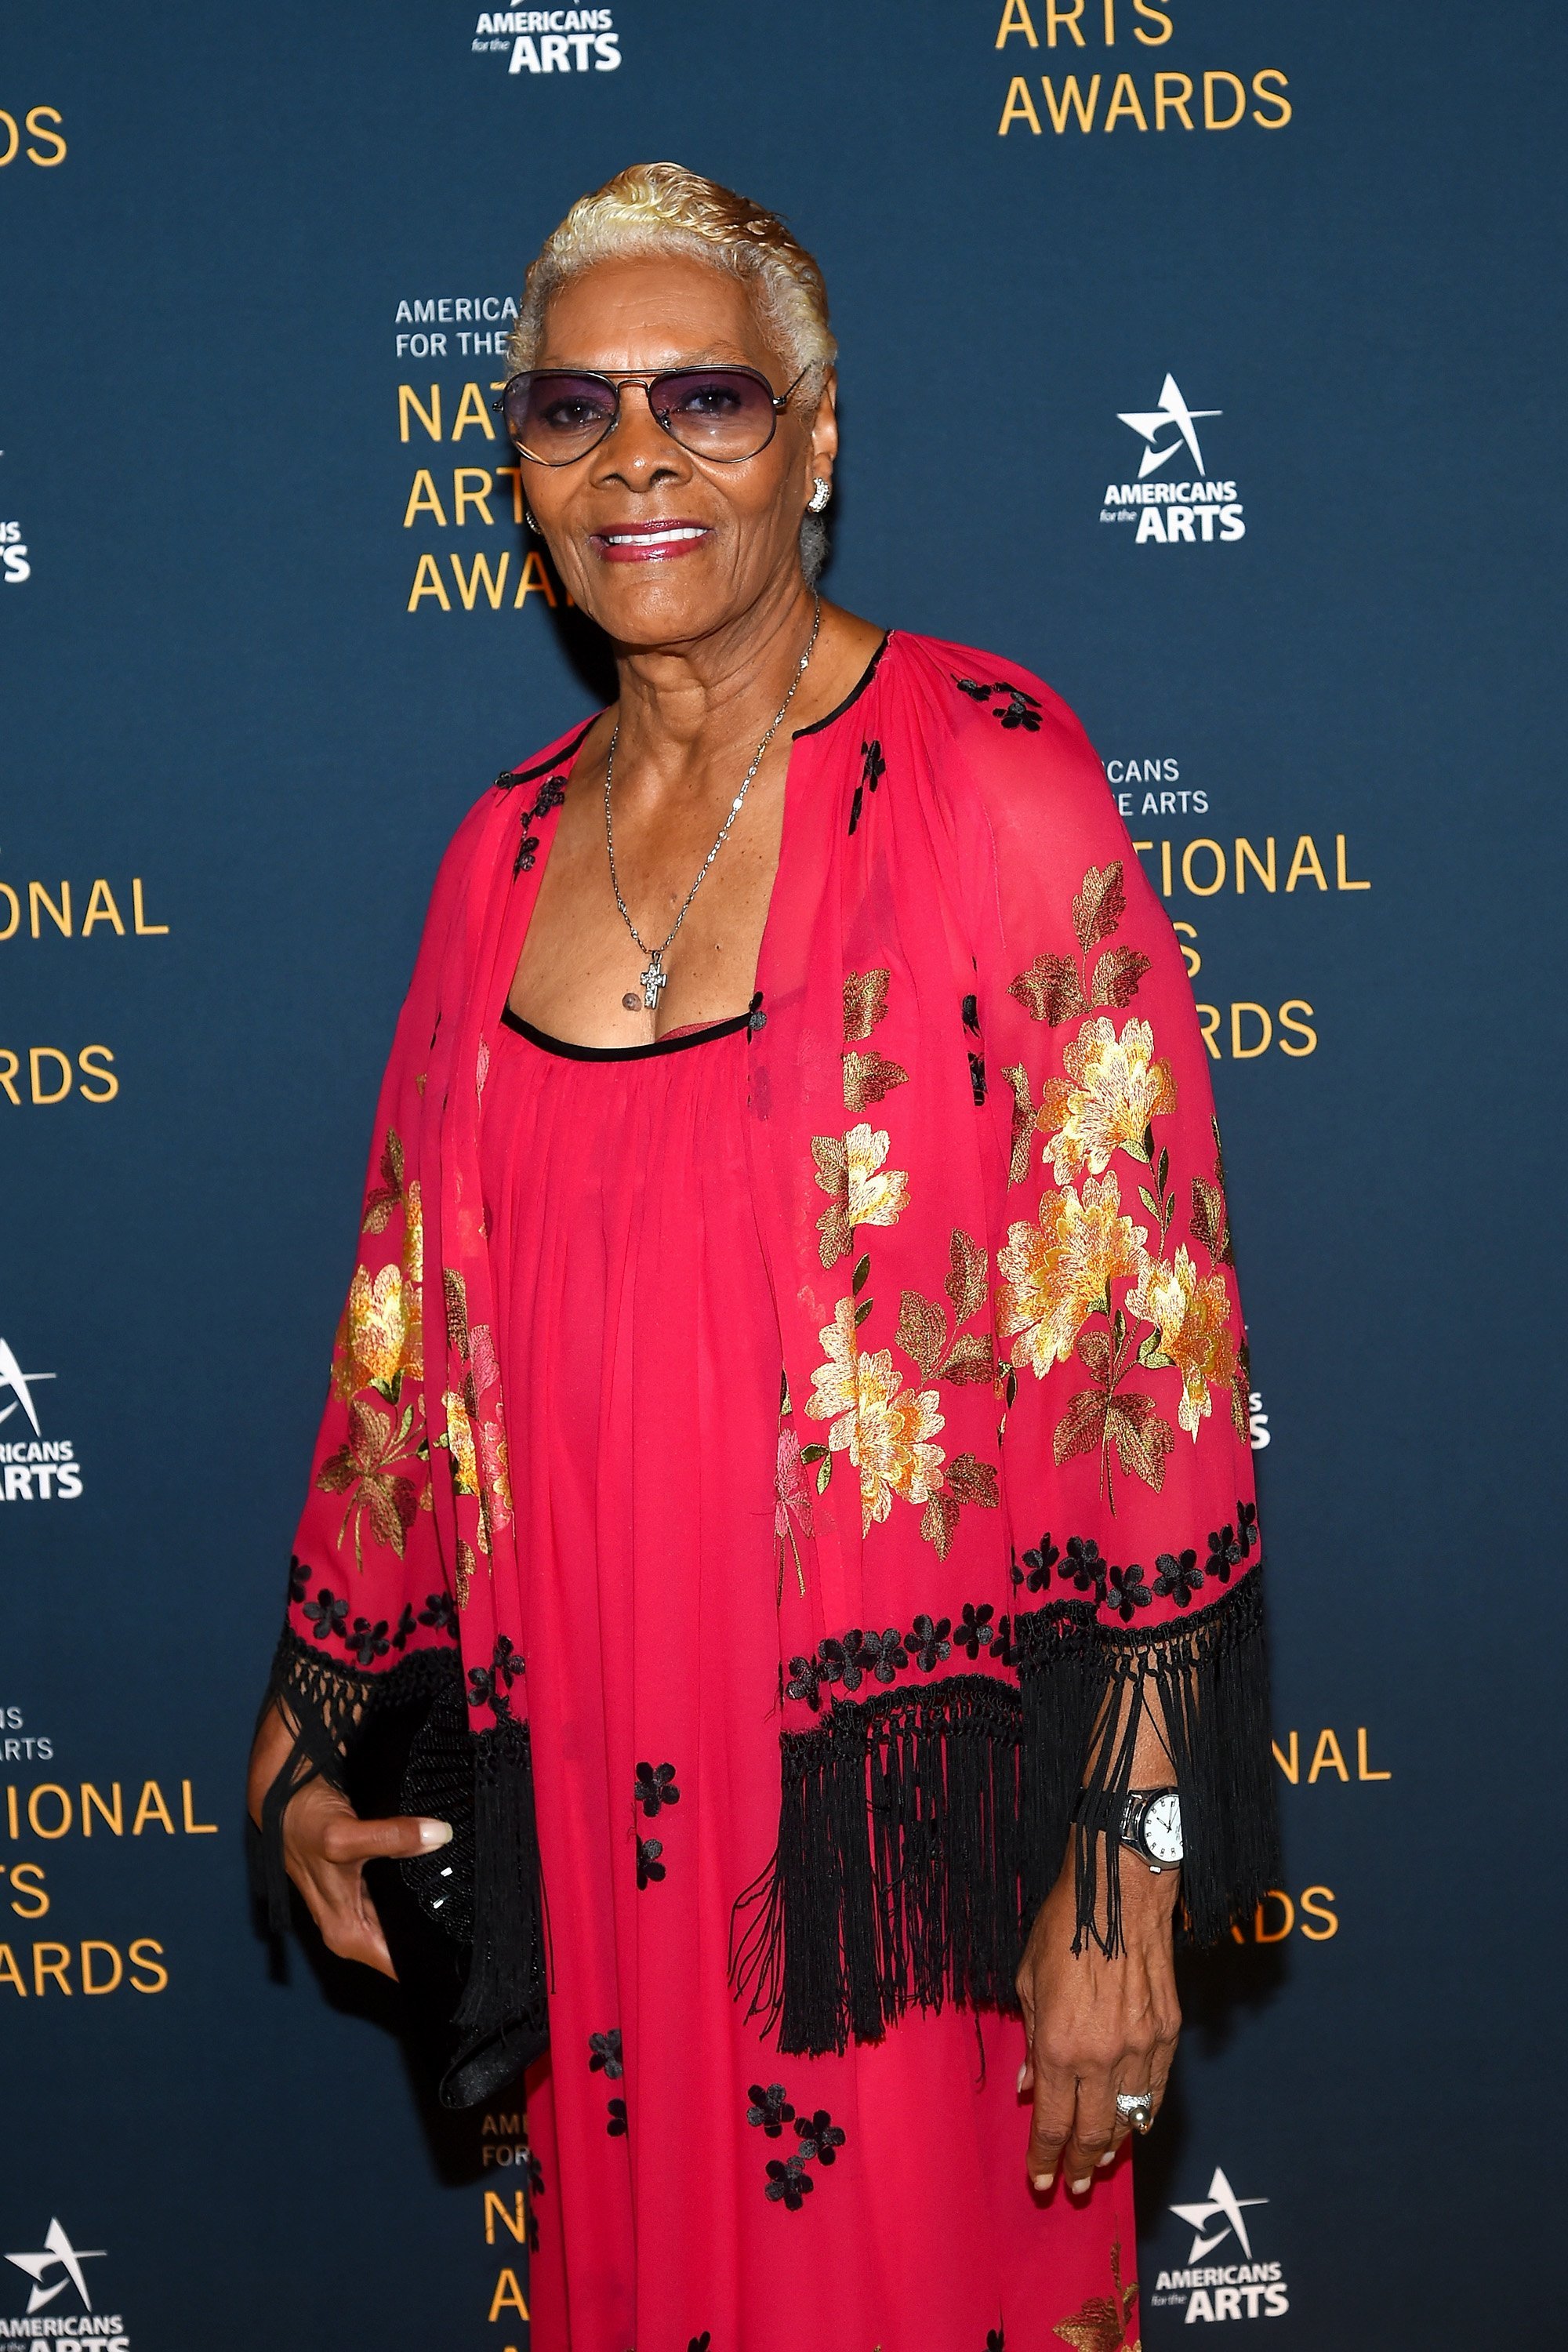 Dionne Warwick at the National Arts Awards in October 2017. | Photo: Getty Images